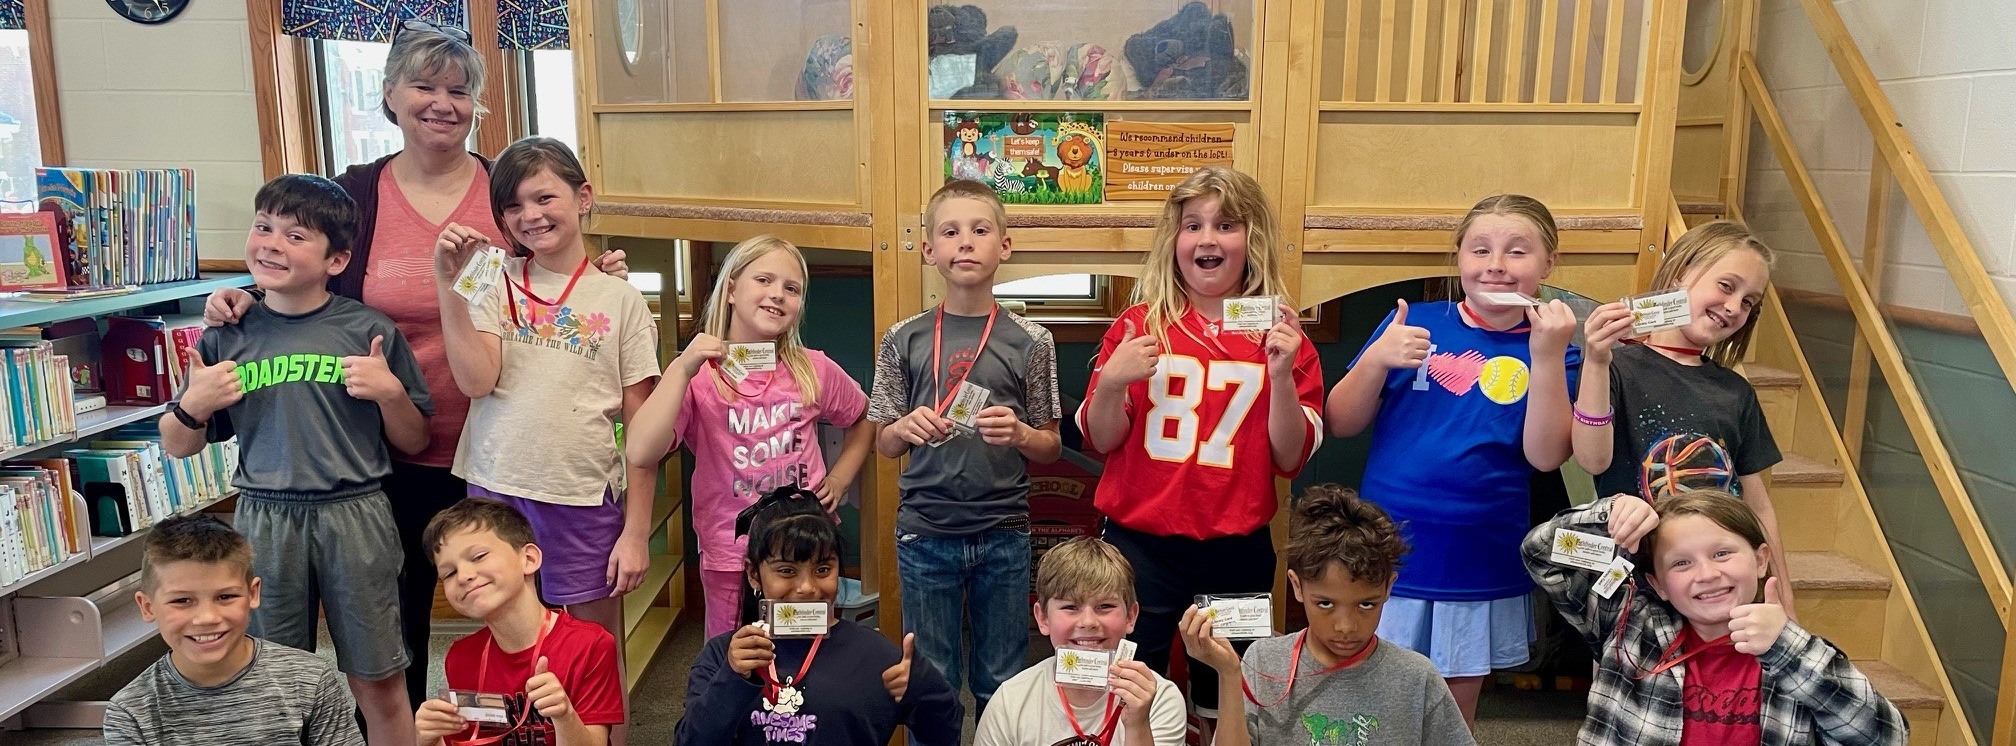 Third Graders at the public library